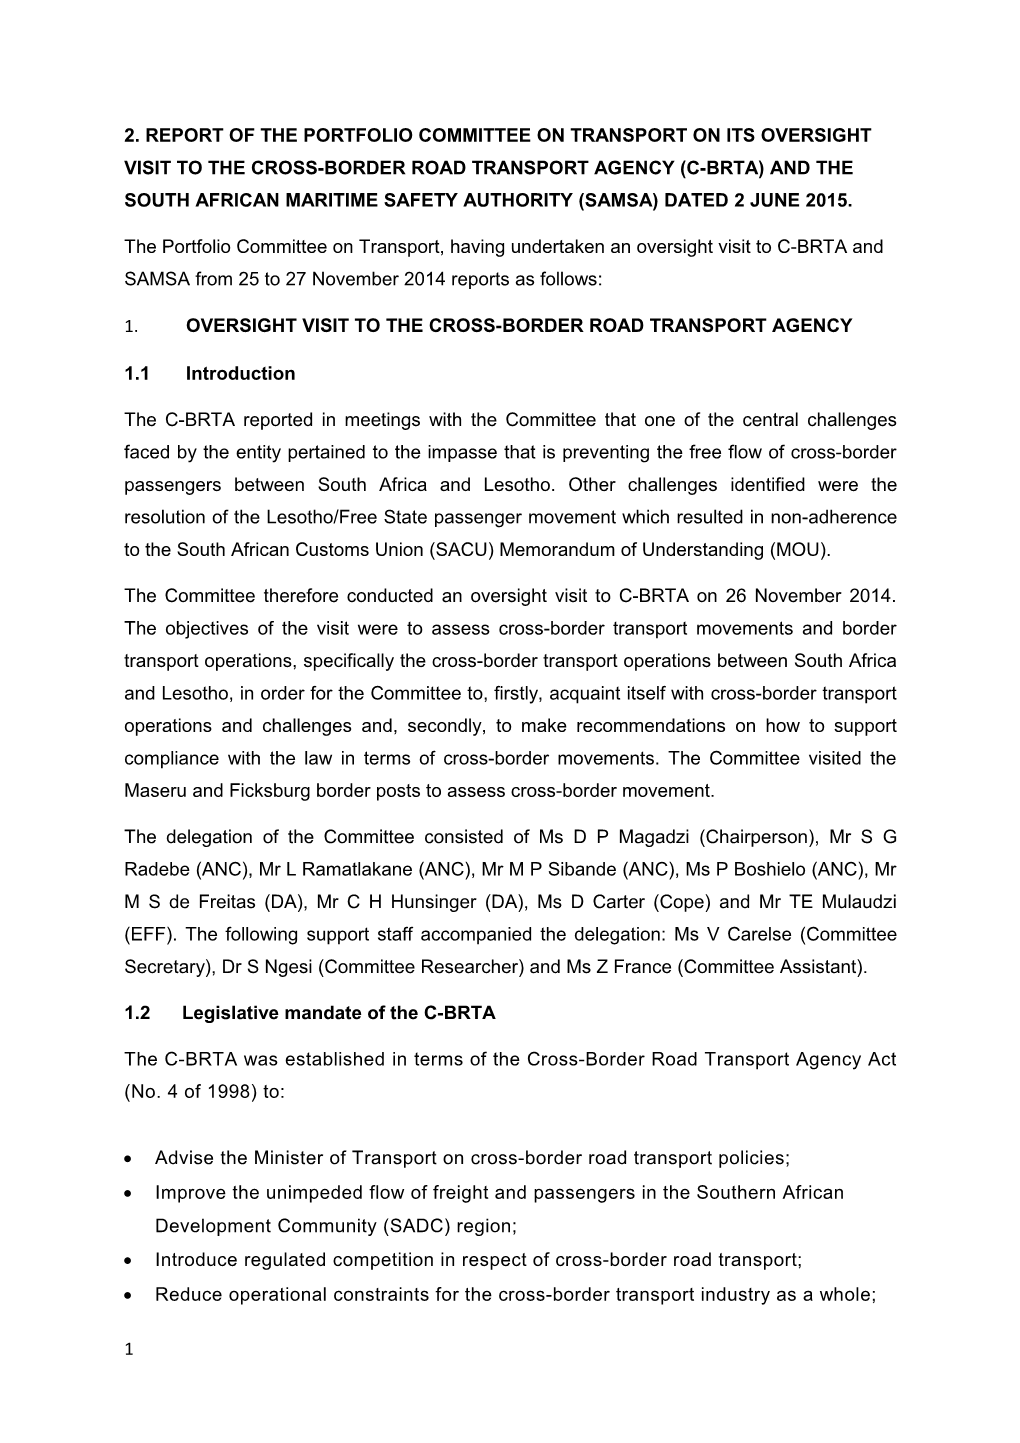 2. Report of the Portfolio Committee on Transport on Its Oversight Visit to the Cross-Border